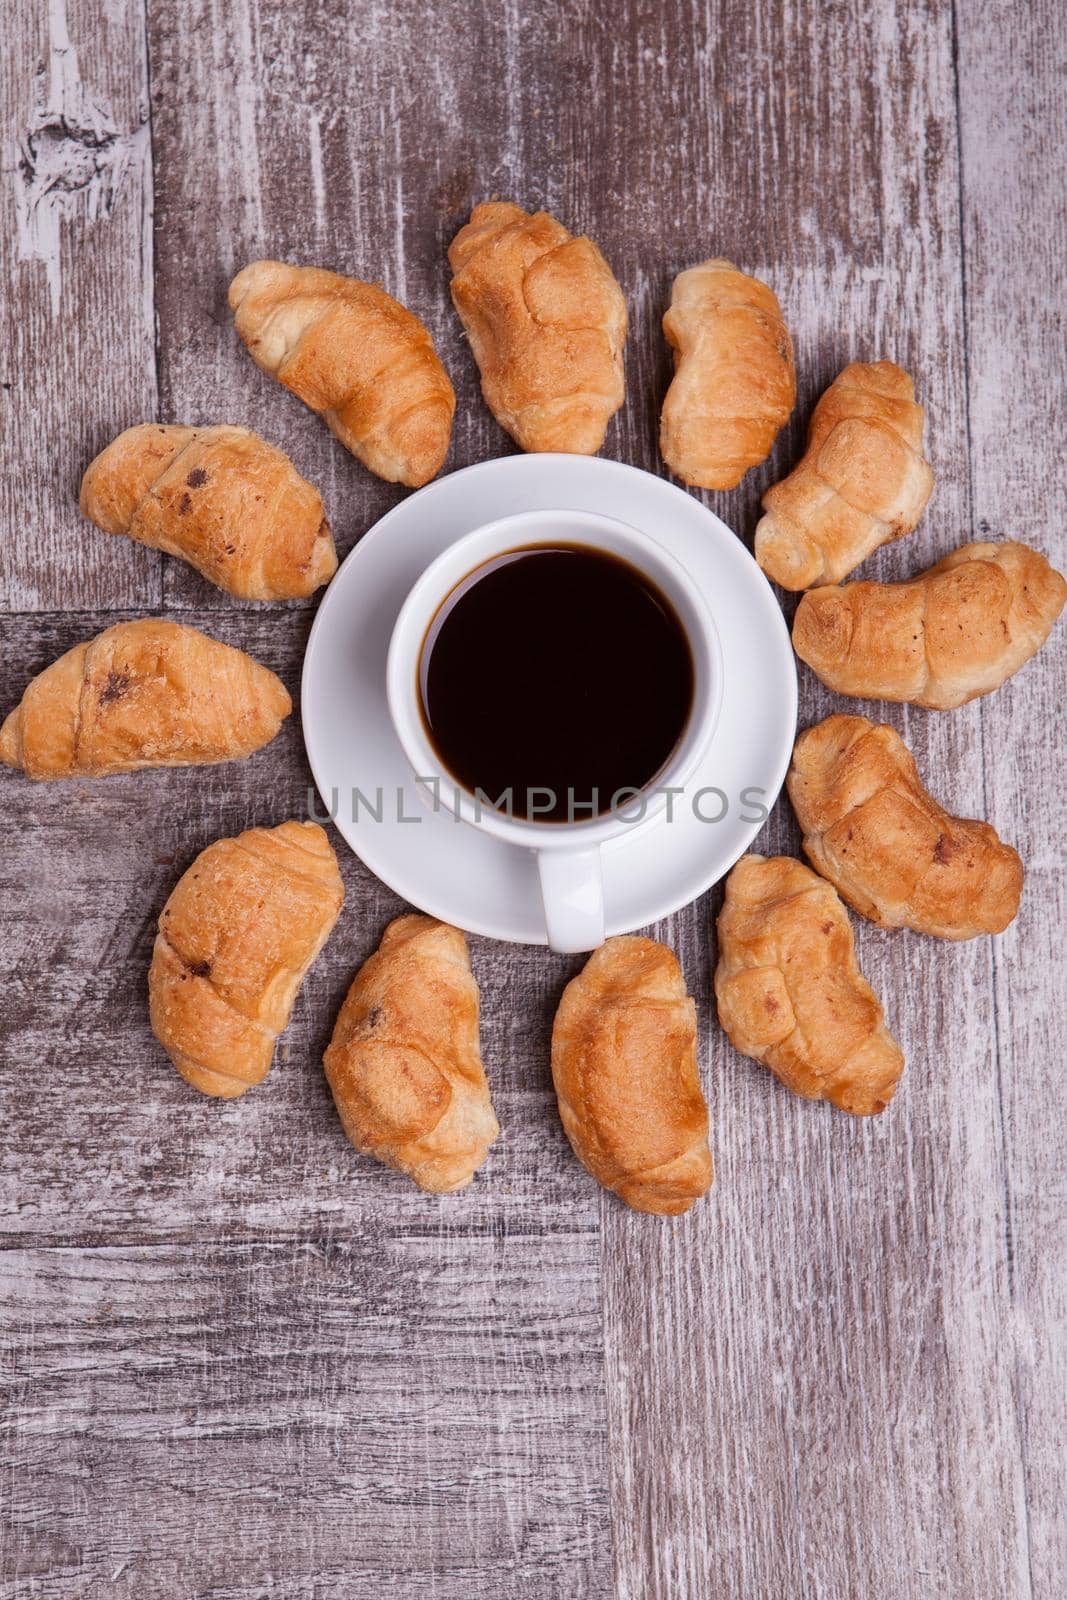 Freshly baked croissants on rustic wooden table with cup of coffee. Delicious coffee.